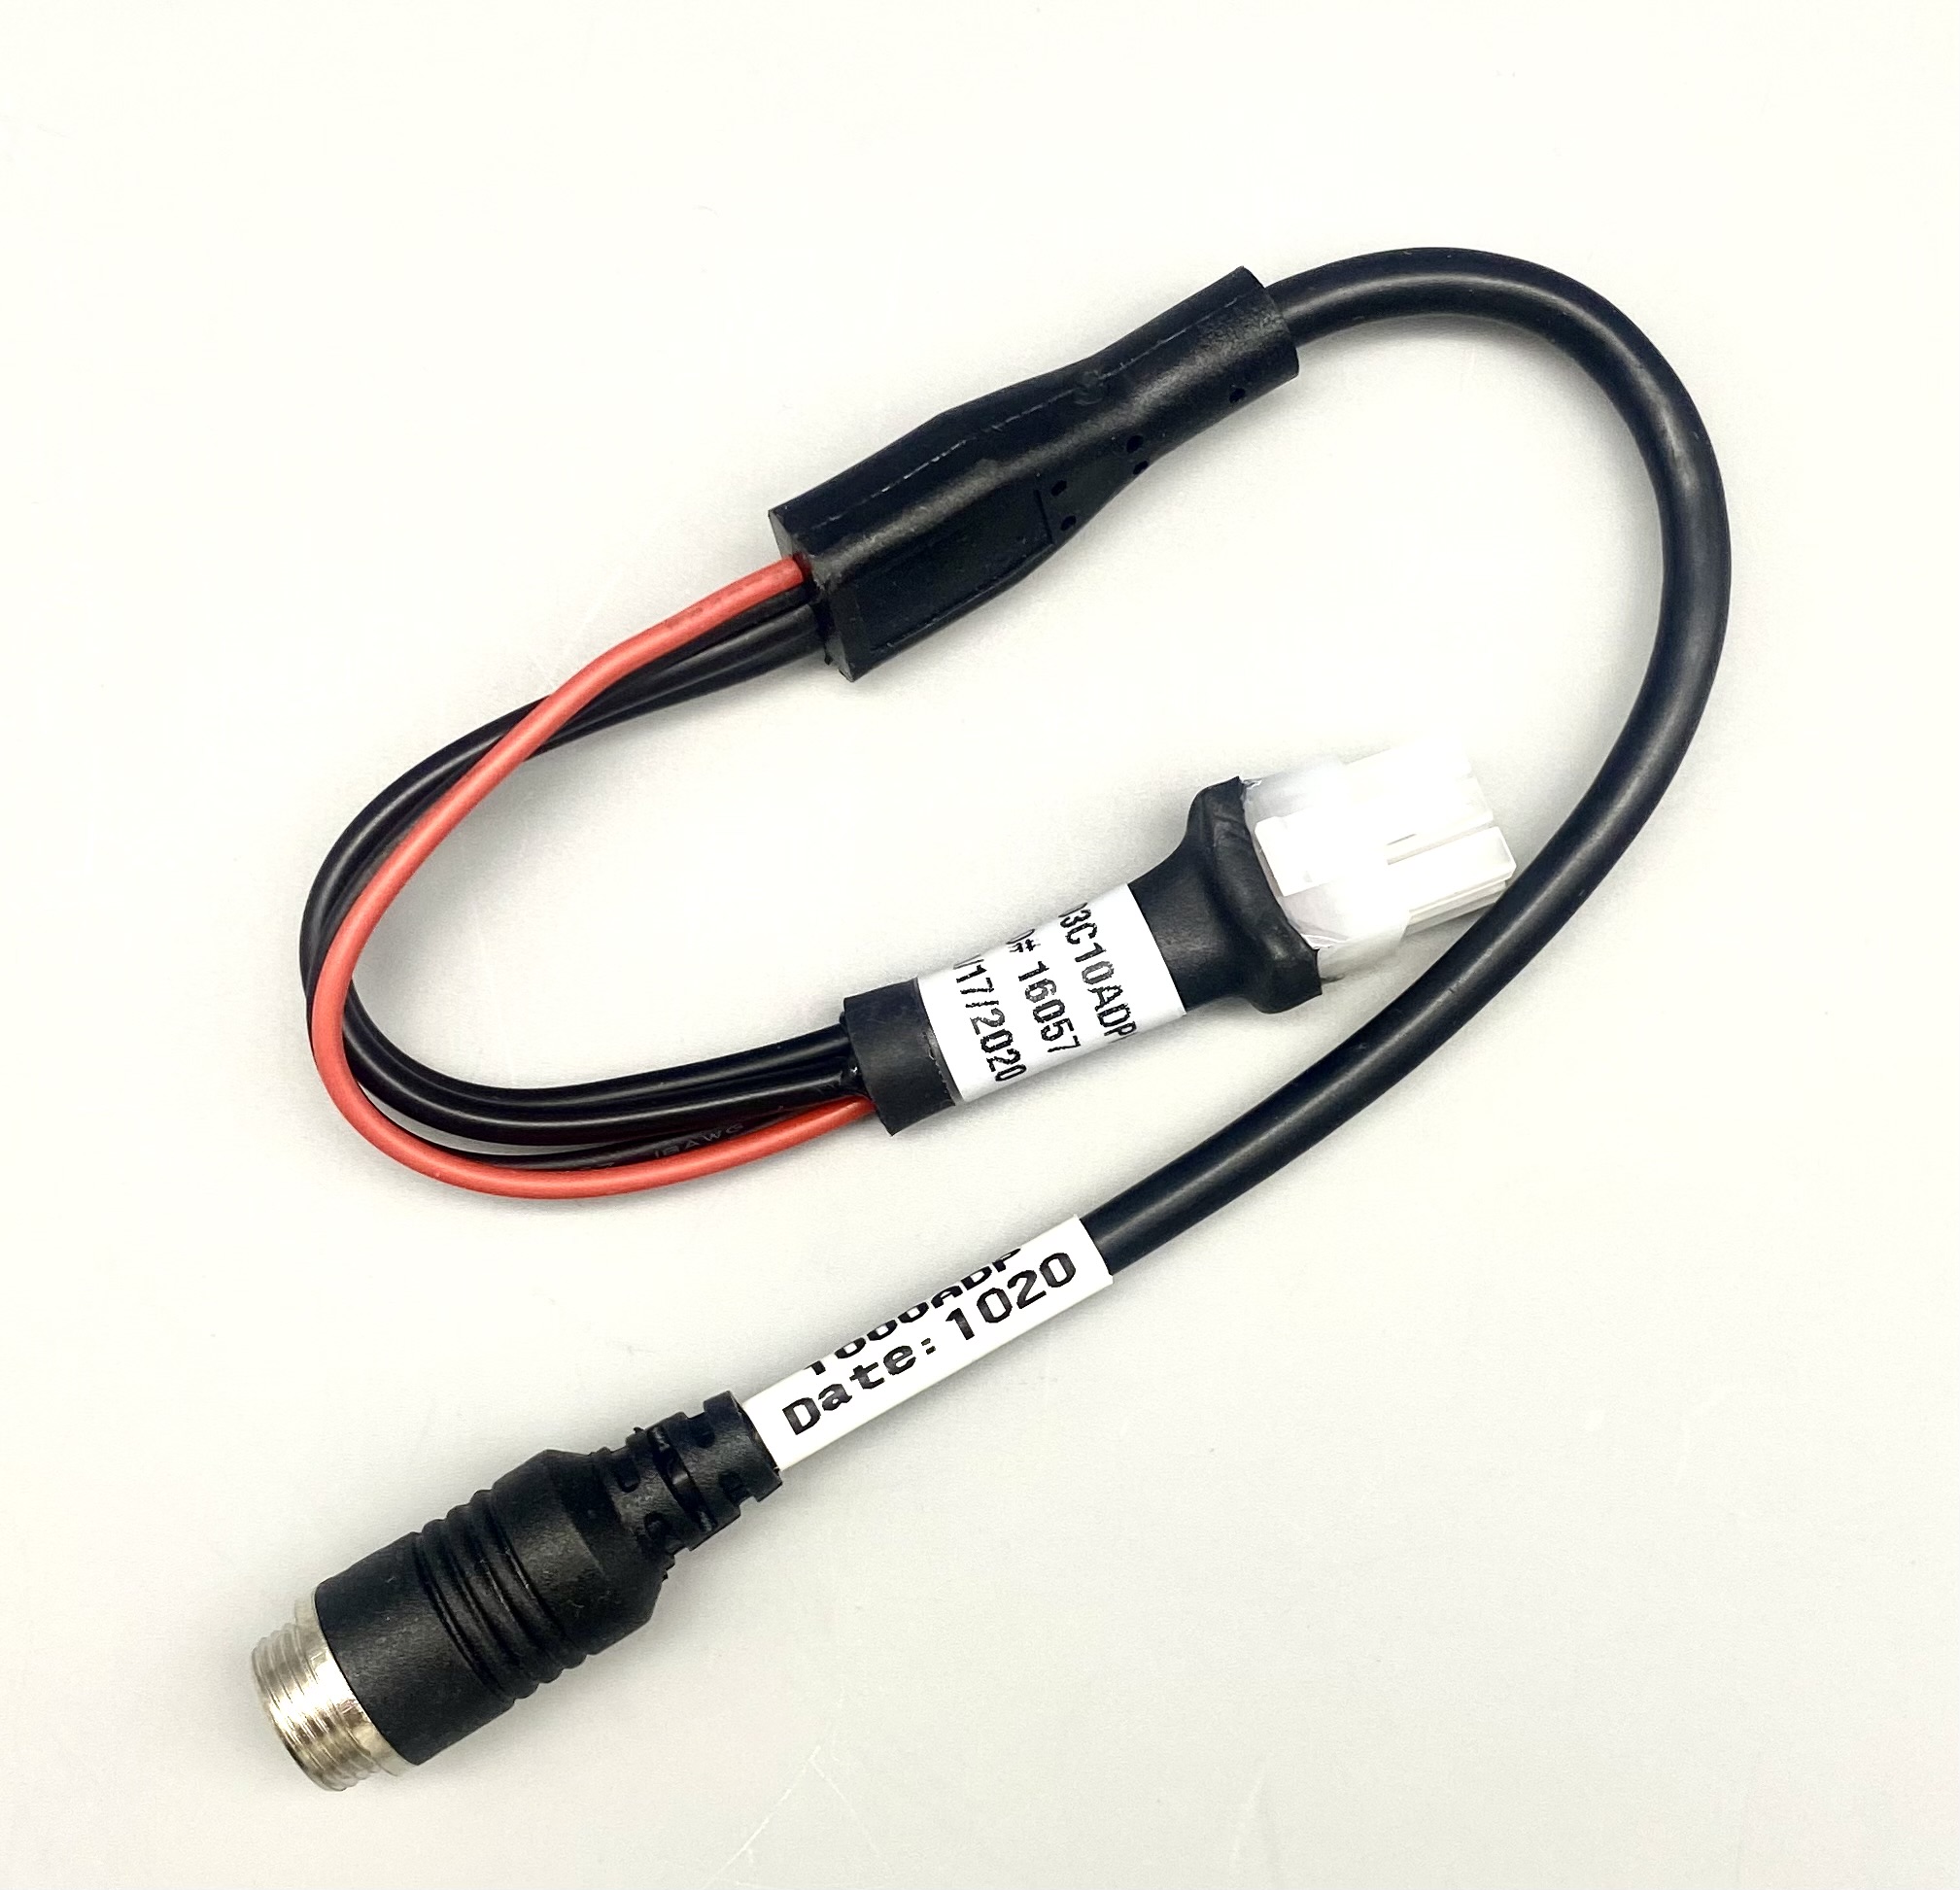 Adapter: C1000-style 4-pin round cable to 6-pin Molex port on CVS150+ camera switcher box